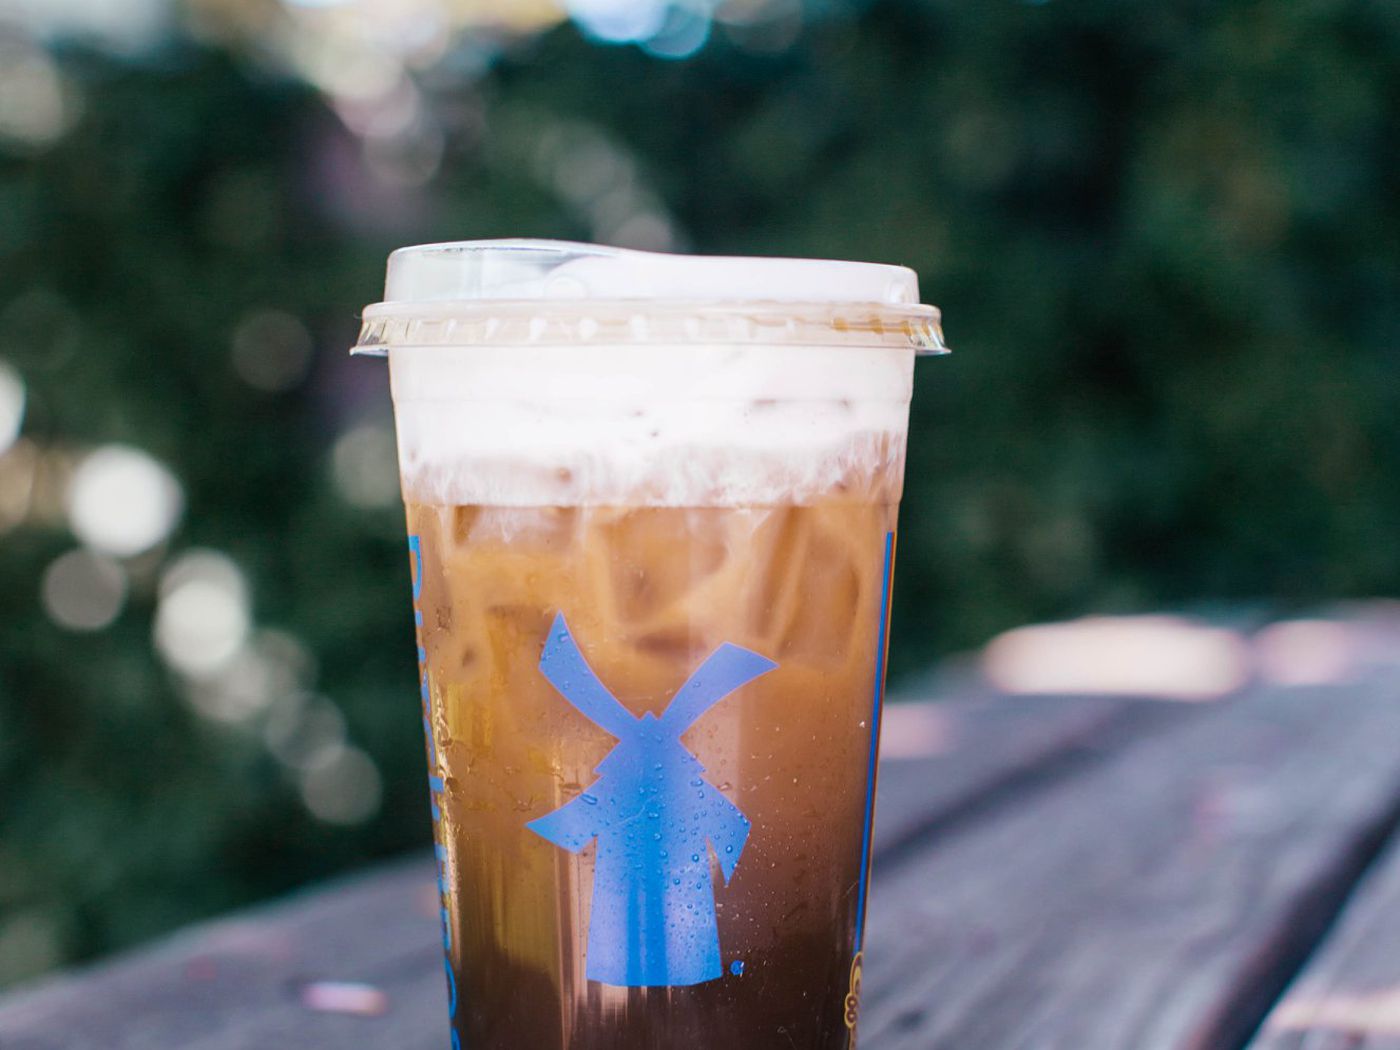 Beloved West Coast Coffee Chain Dutch Bros. Opens Two New DFW Locations